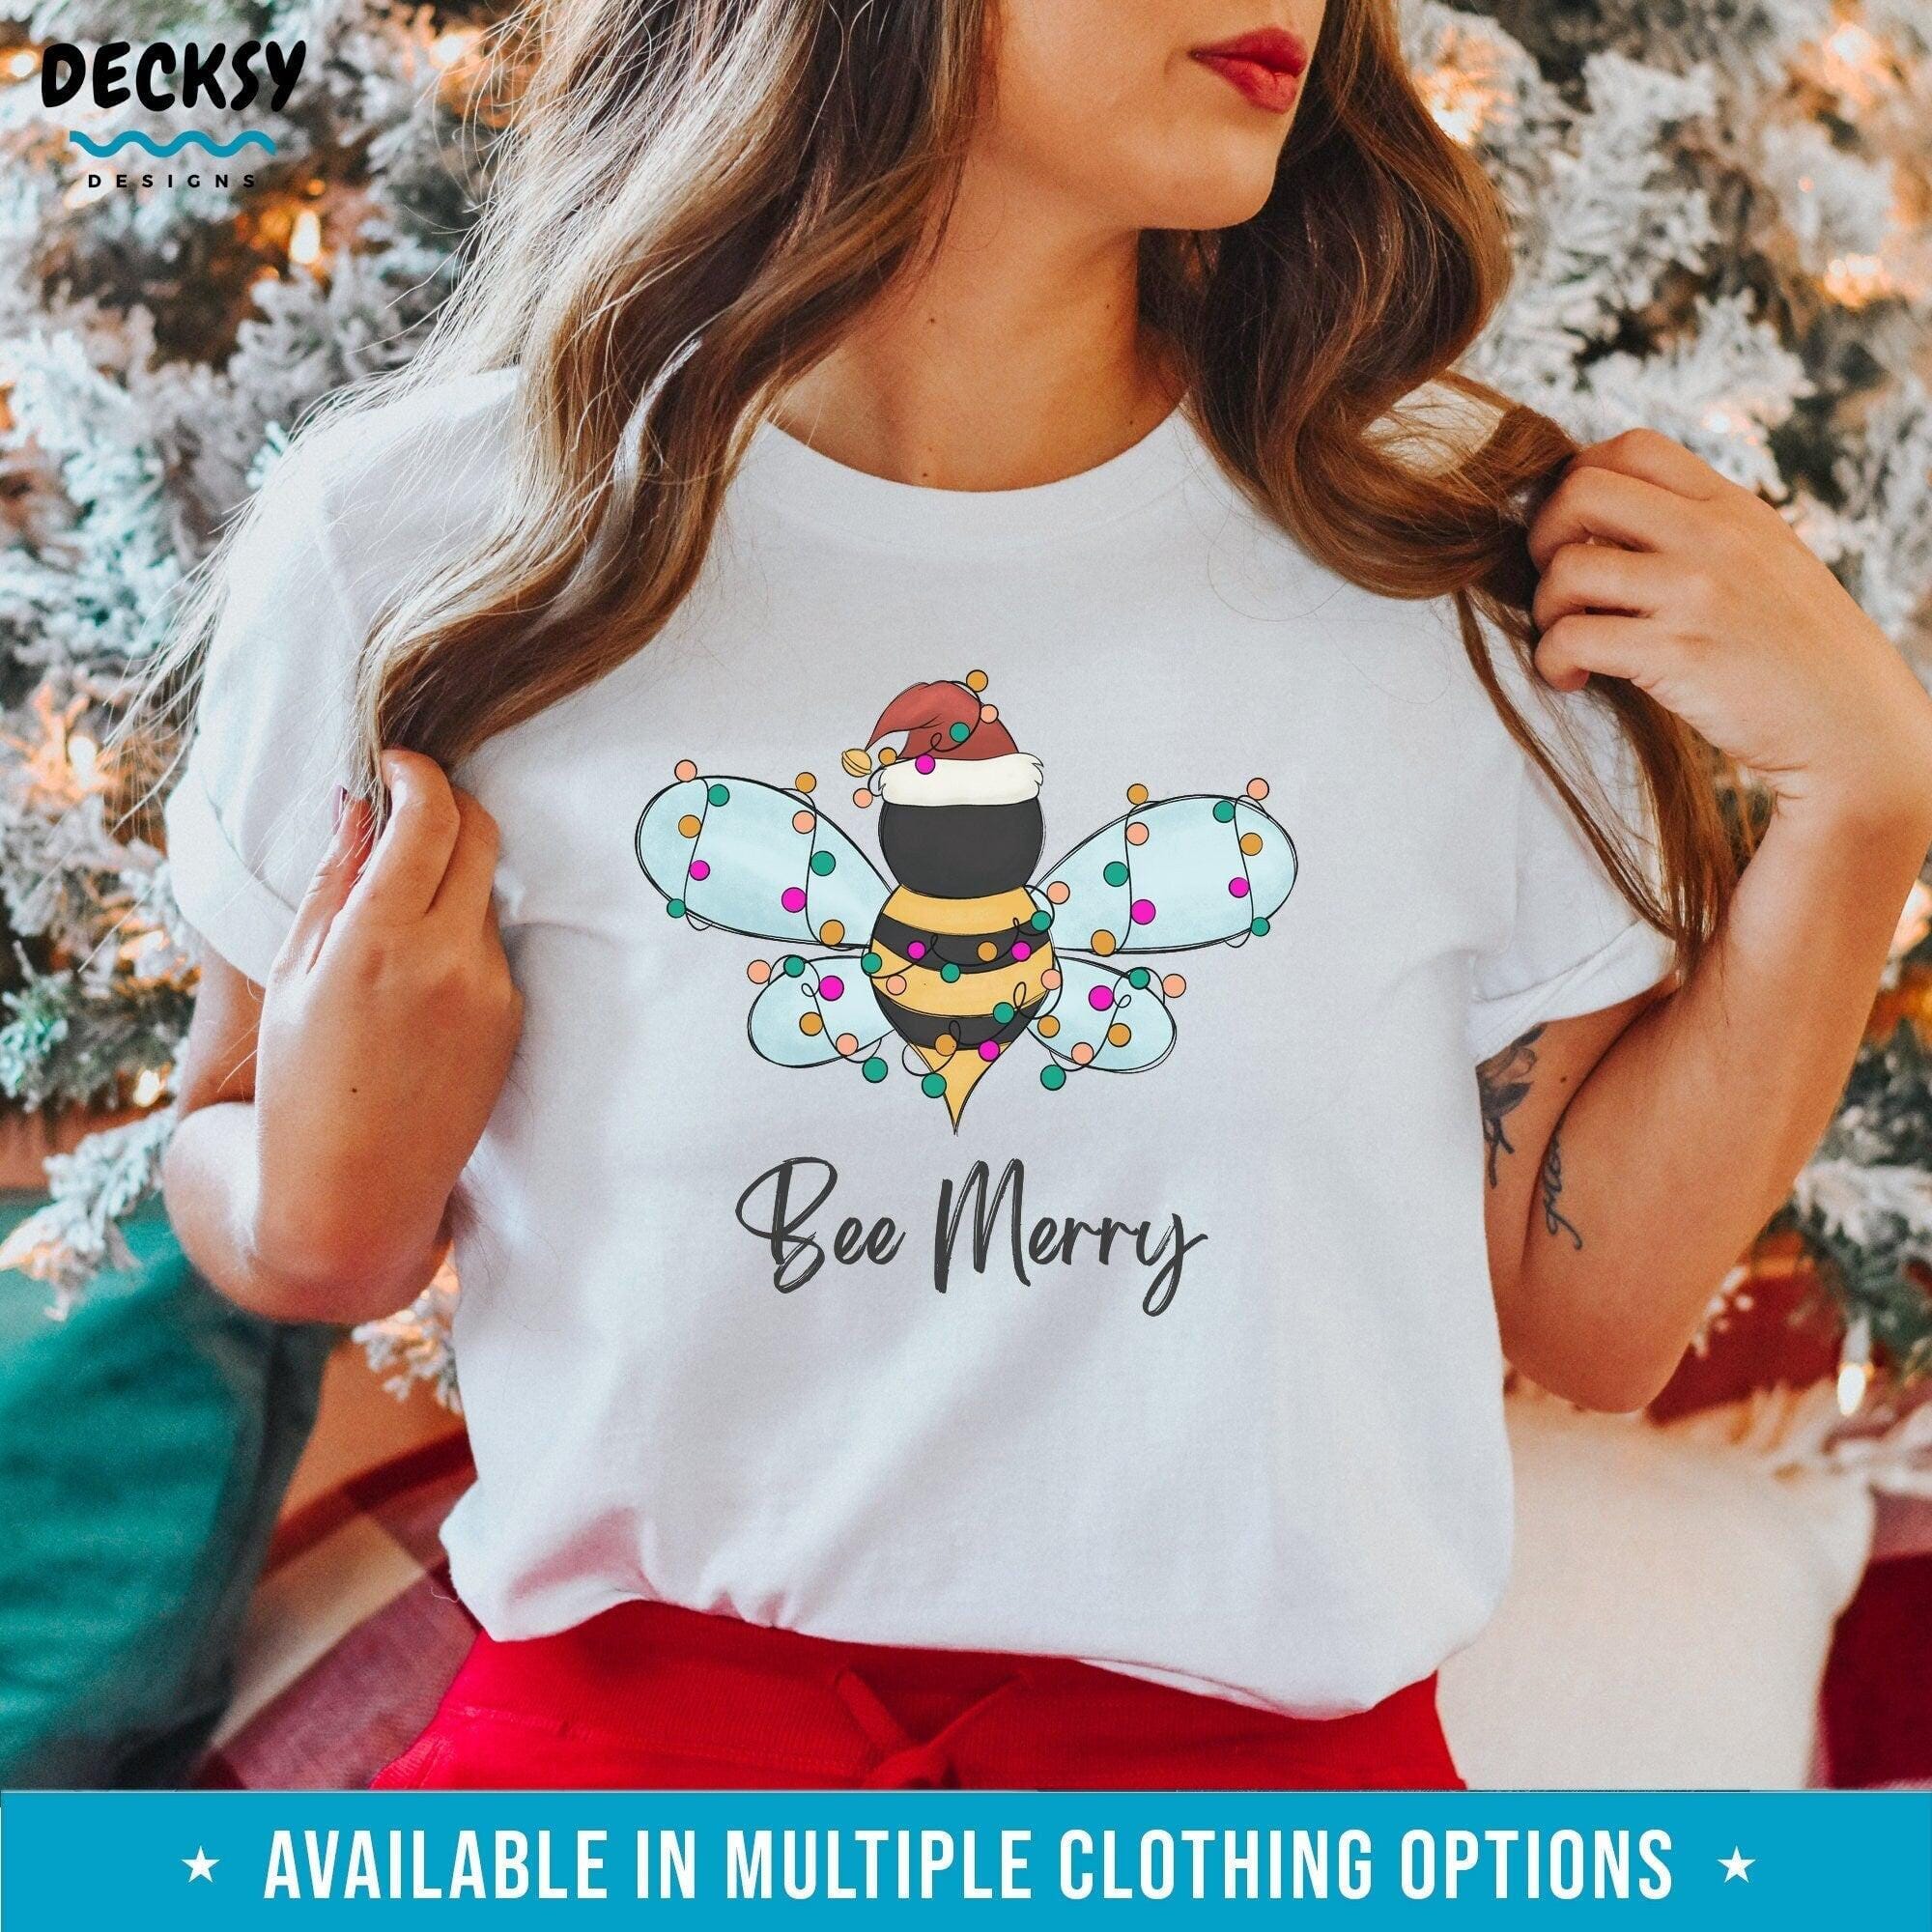 Bee Merry Shirt, Beekeeper Gift-Clothing:Gender-Neutral Adult Clothing:Tops & Tees:T-shirts:Graphic Tees-DecksyDesigns